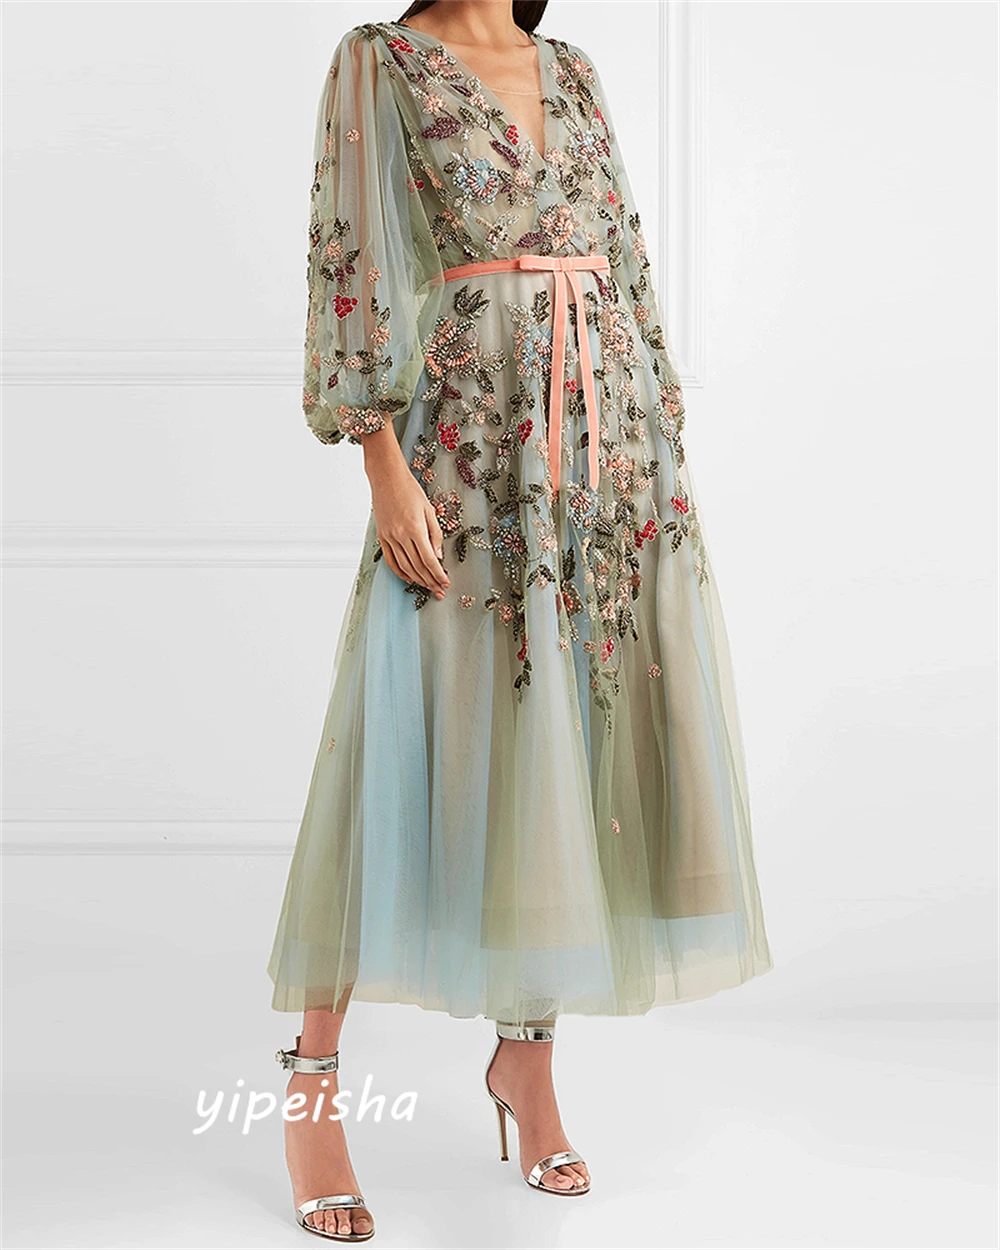 IntricateWomen V-neck A-line Formal Ocassion Gown Applique Bows Anke length Skirts Organza Homecoming Dress فساتين سهره